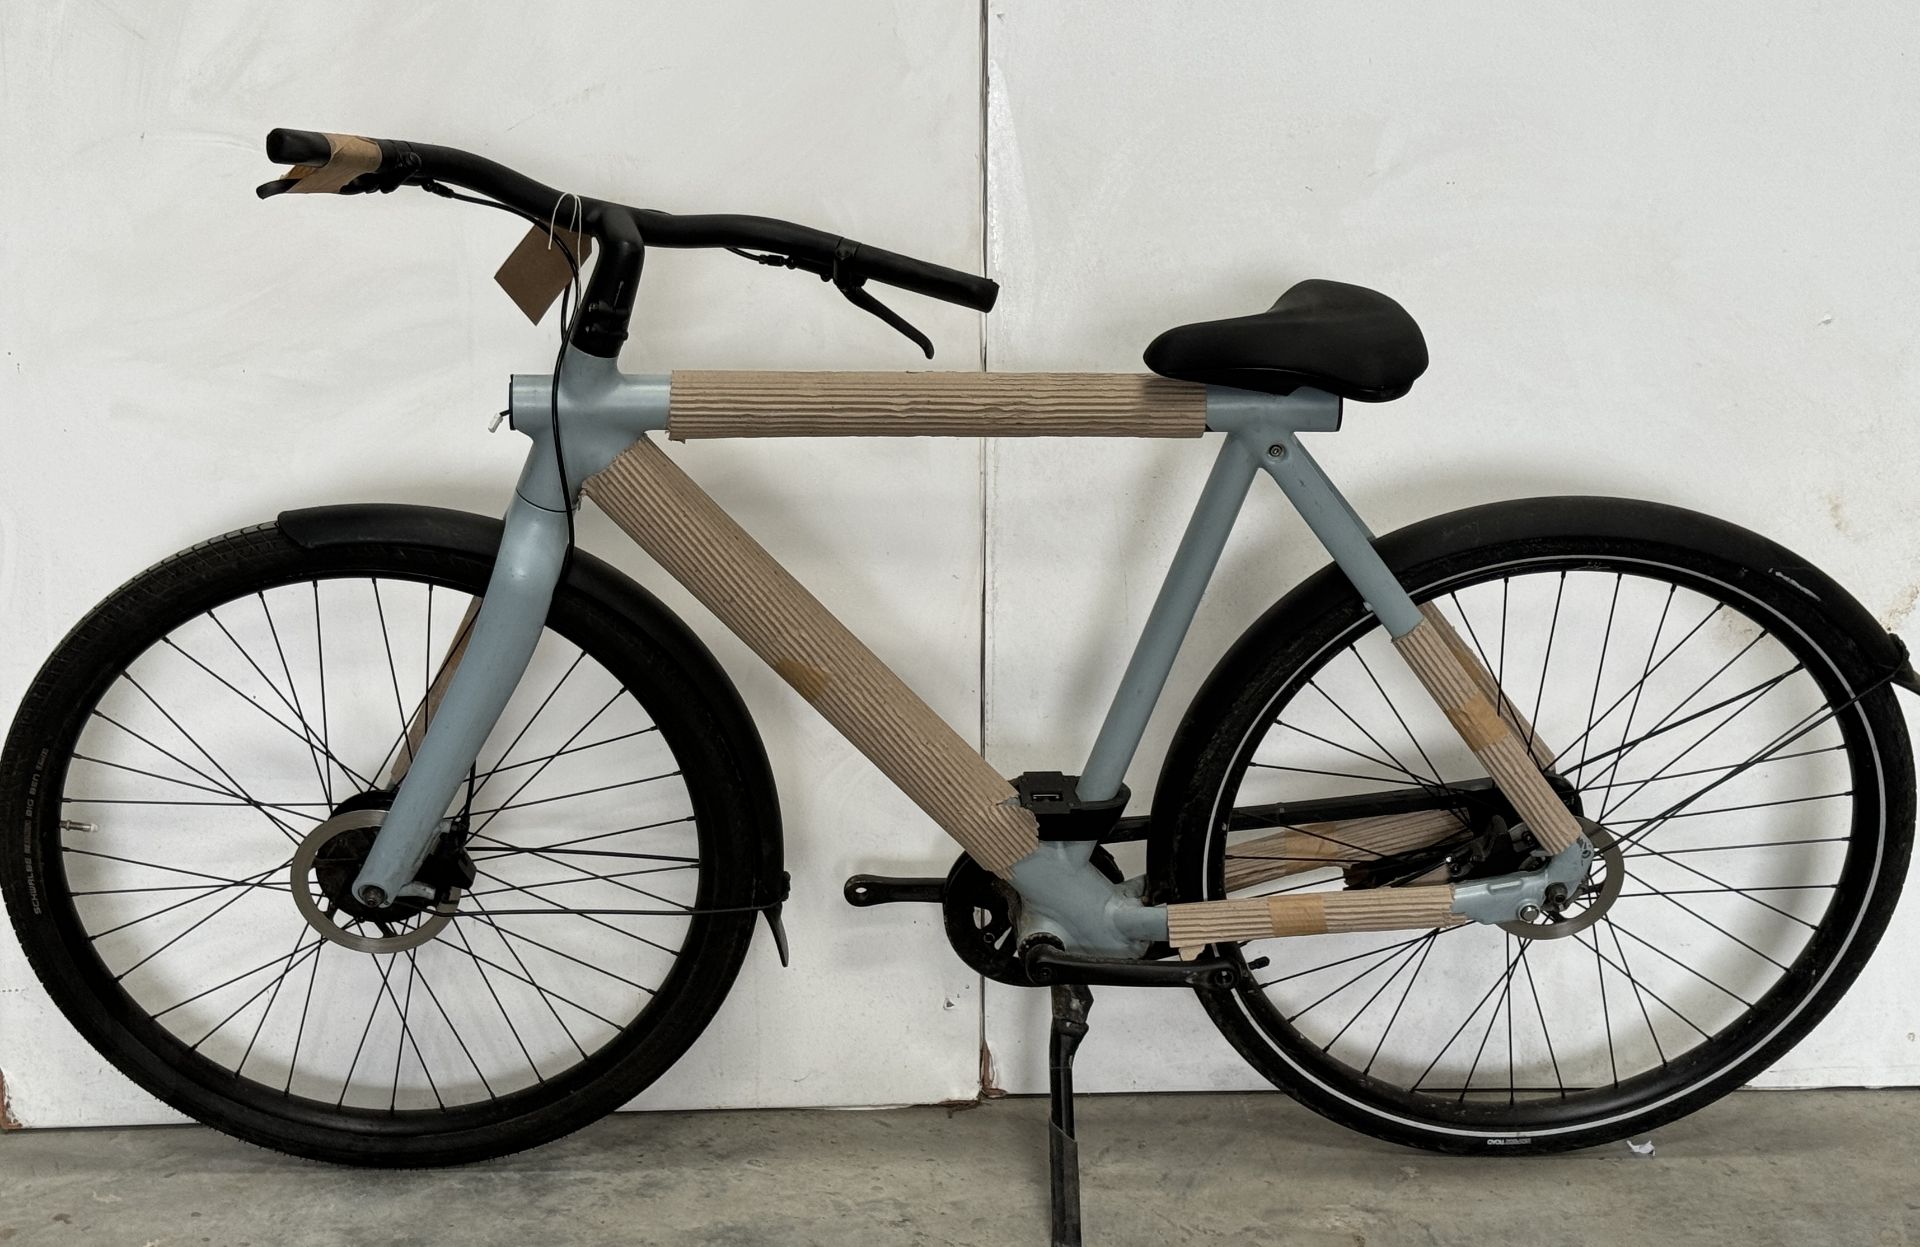 VanMoof S3 Electric Bike, Frame Number ASY1025735 (NOT ROADWORTHY - FOR SPARES ONLY) (No codes